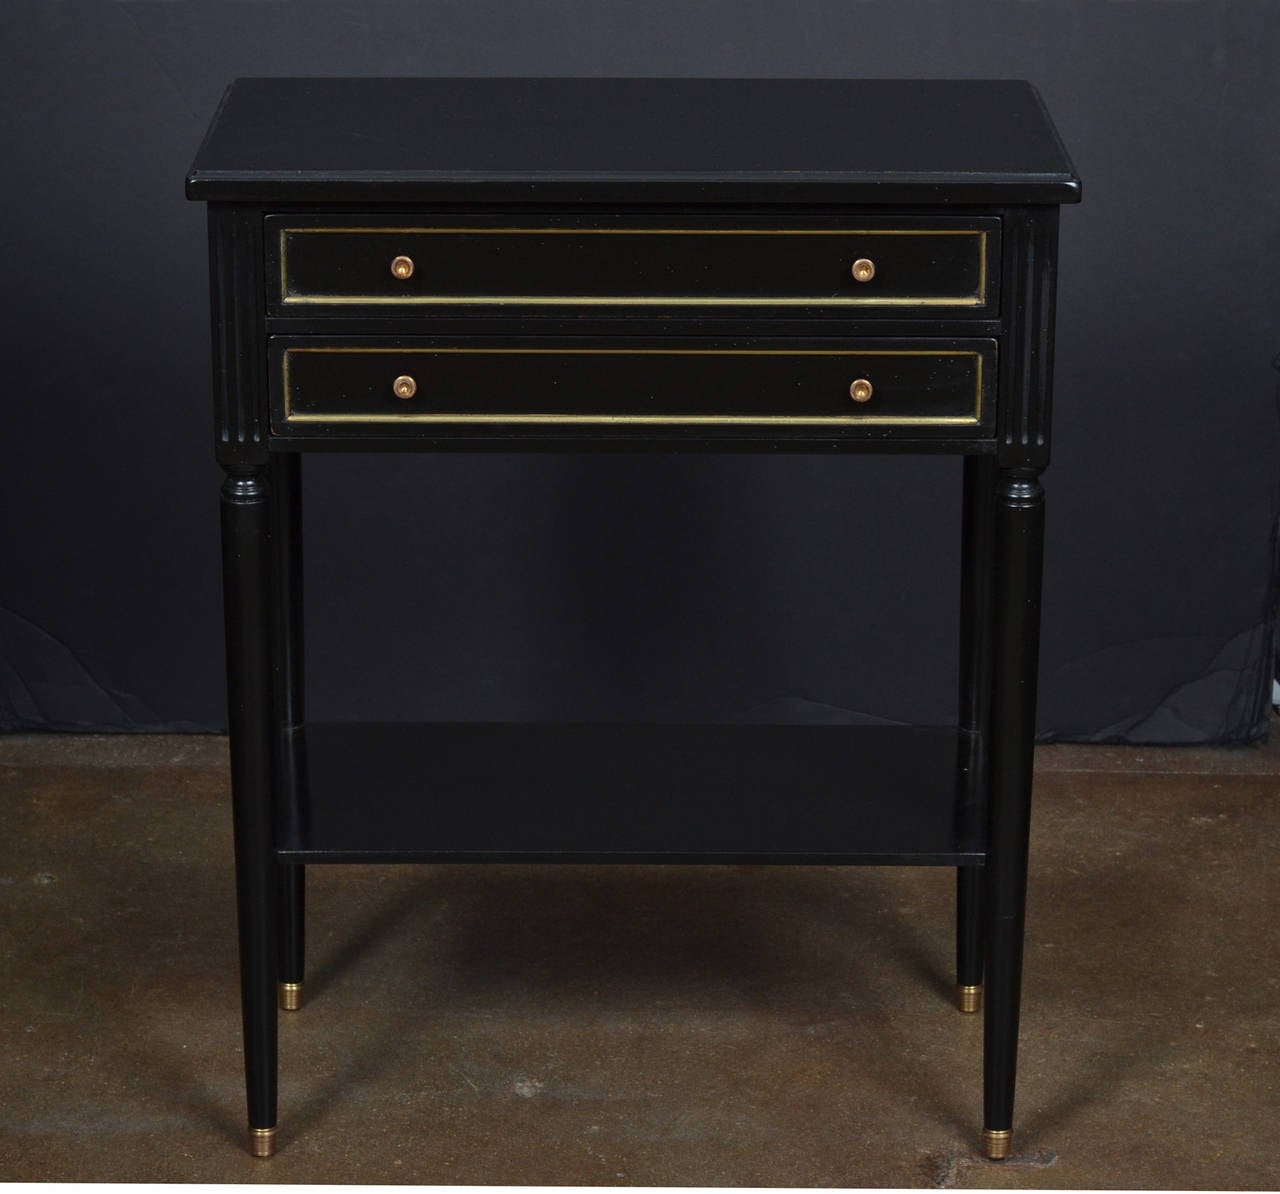 French Louis XVI style side or console table in ebonized walnut finished with a lustrous French polish. Two dovetailed drawers with brass trim and pulls, a bottom shelf, and brass capped feet.